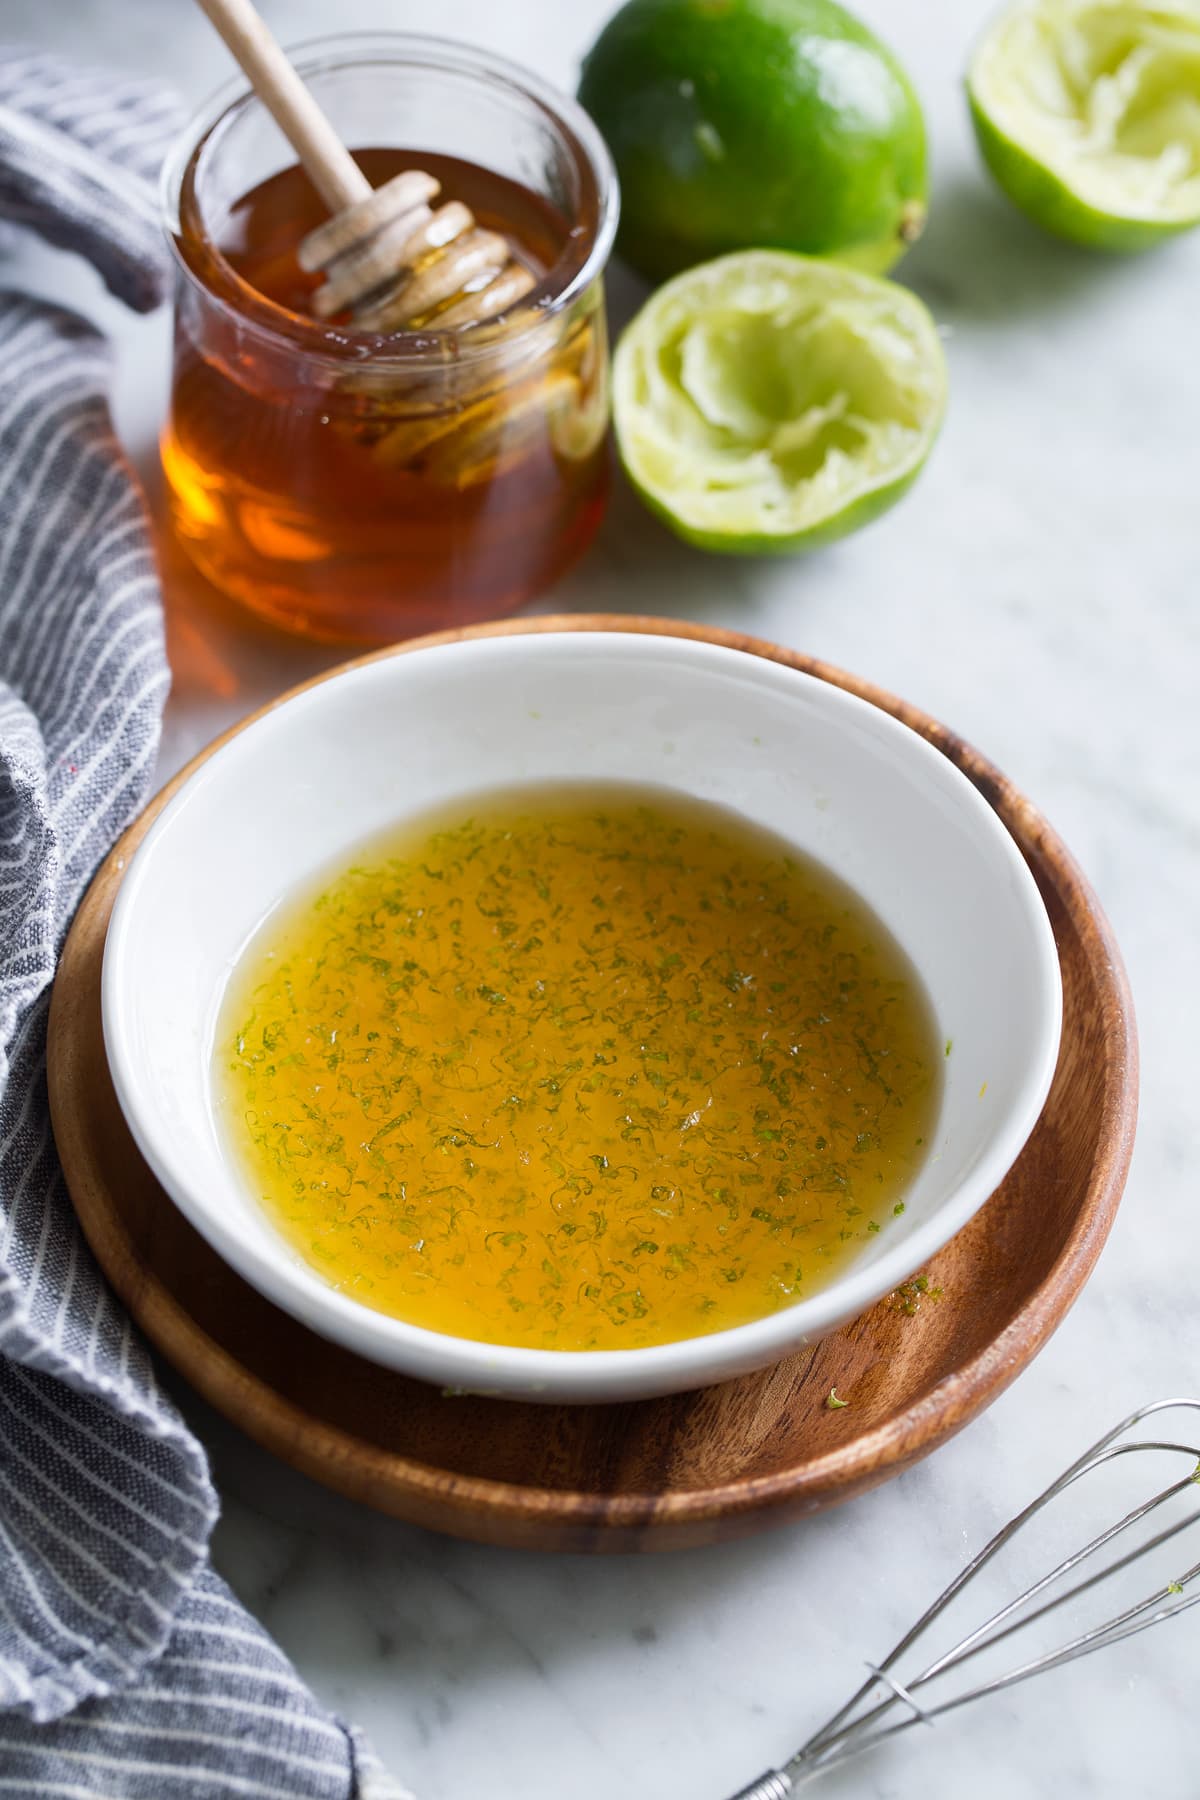 Honey lemon fruit salad dressing in a small white bowl set on a wooden plate.